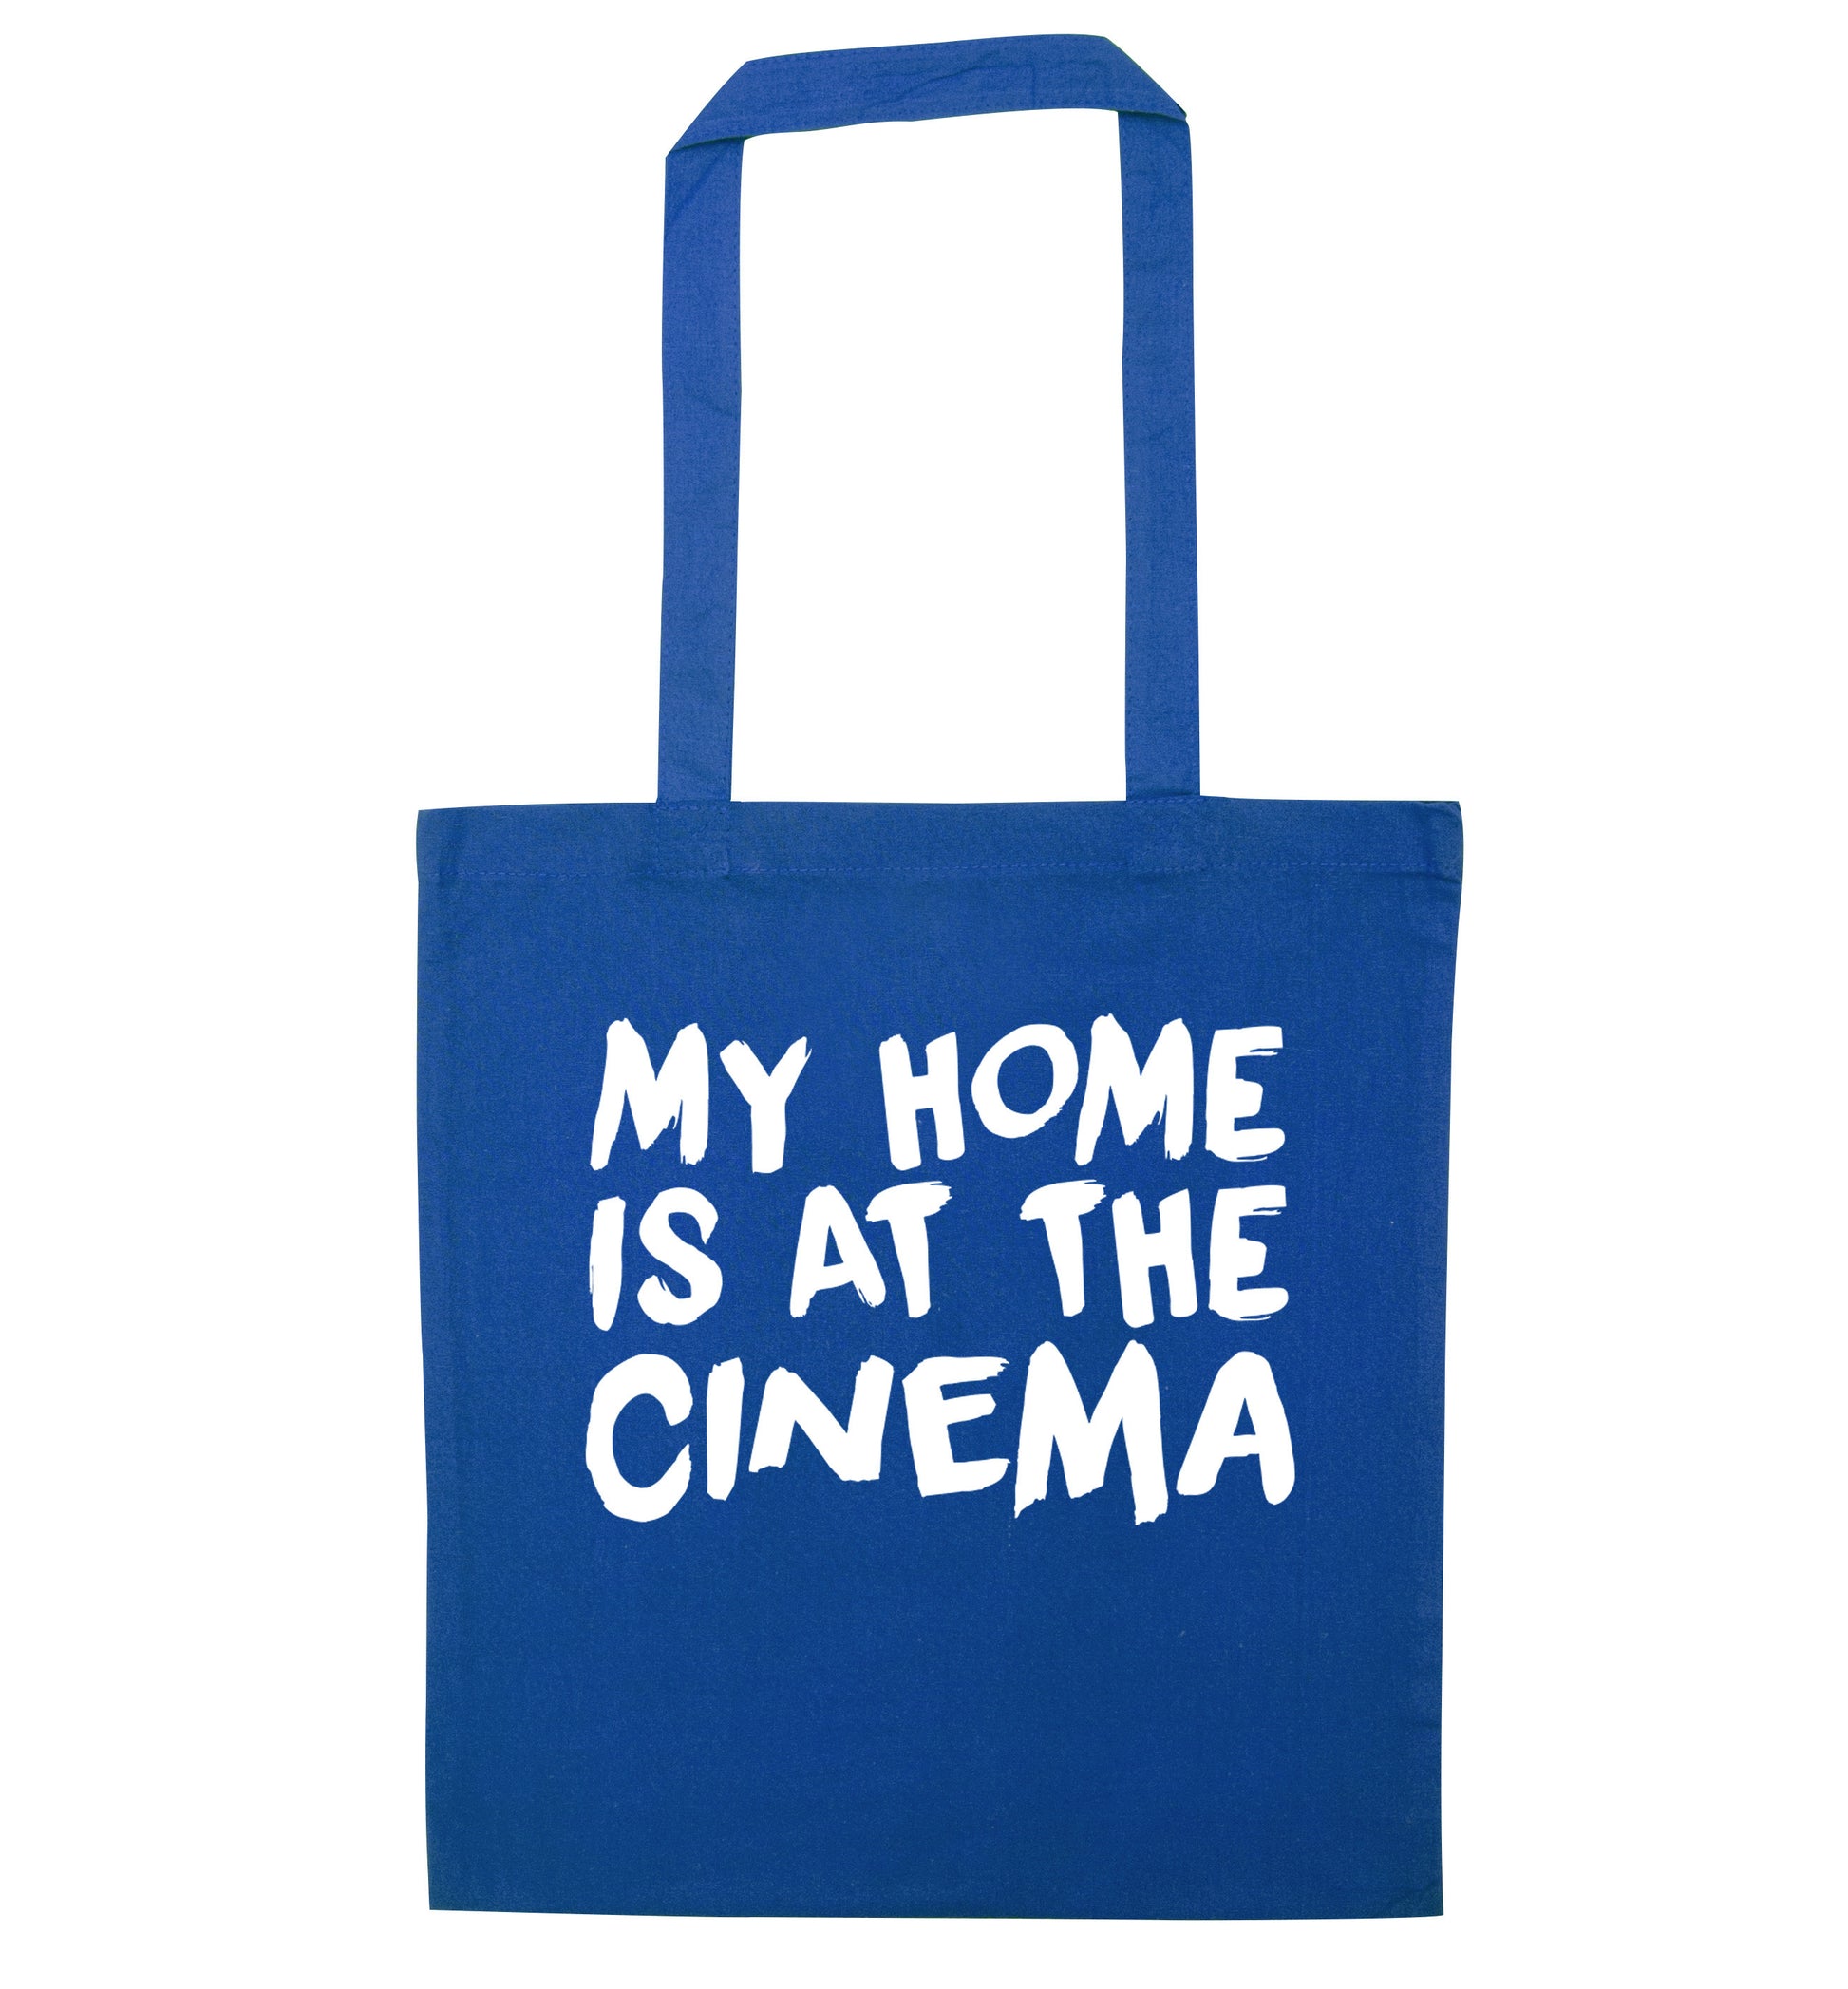 My home is at the cinema blue tote bag